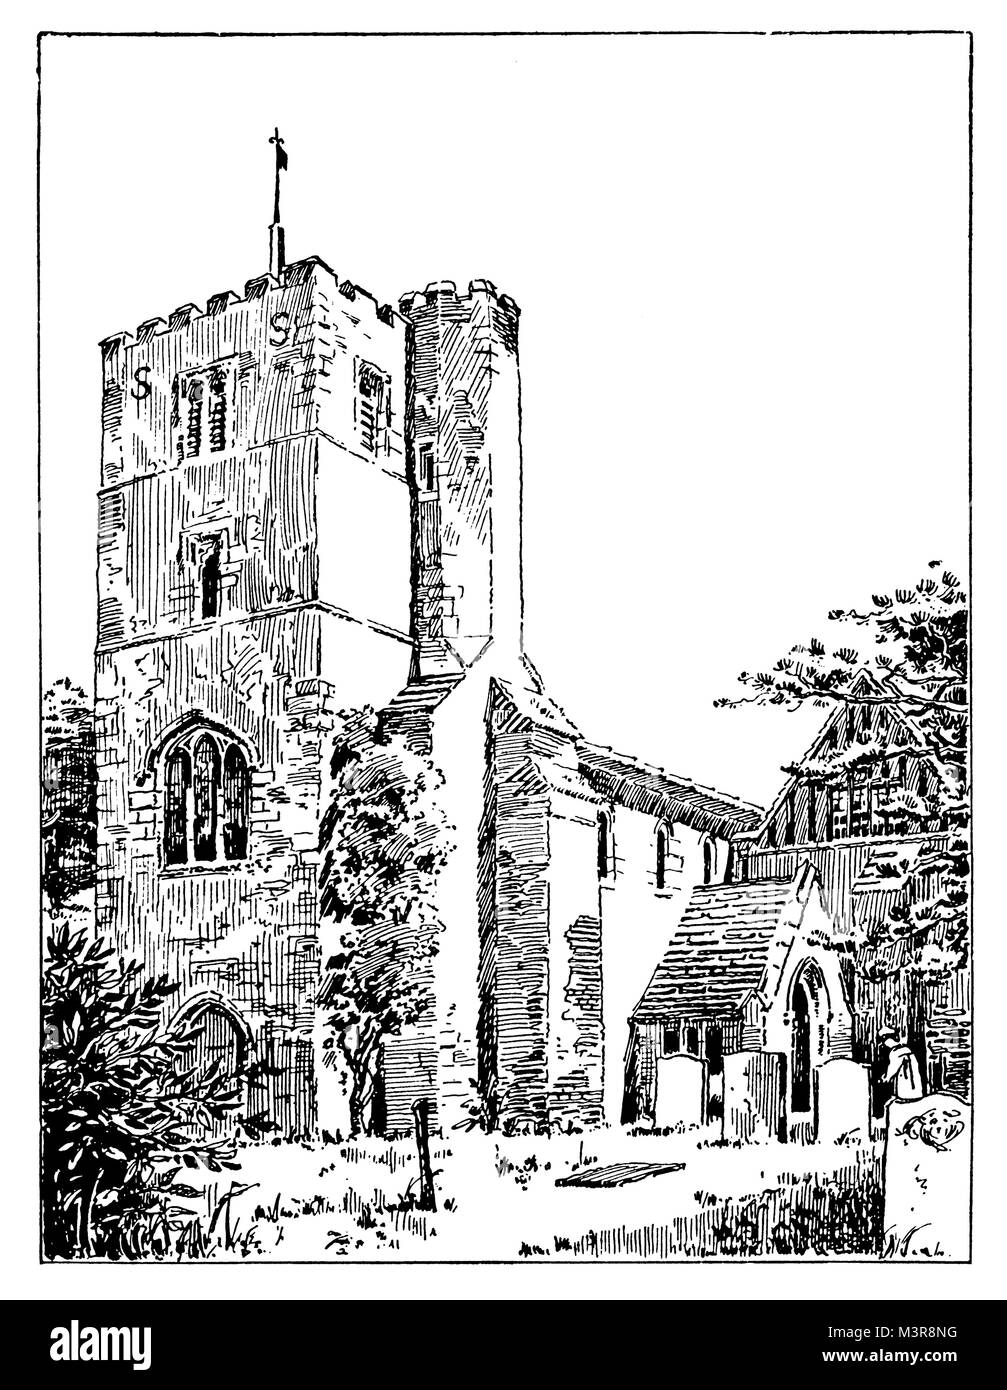 Saint Michael’s Church, St Albans, Hertfordshire in 1880s, line illustration from 1895 The Studio an Illustrated Magazine of Fine and Applied Art Stock Photo